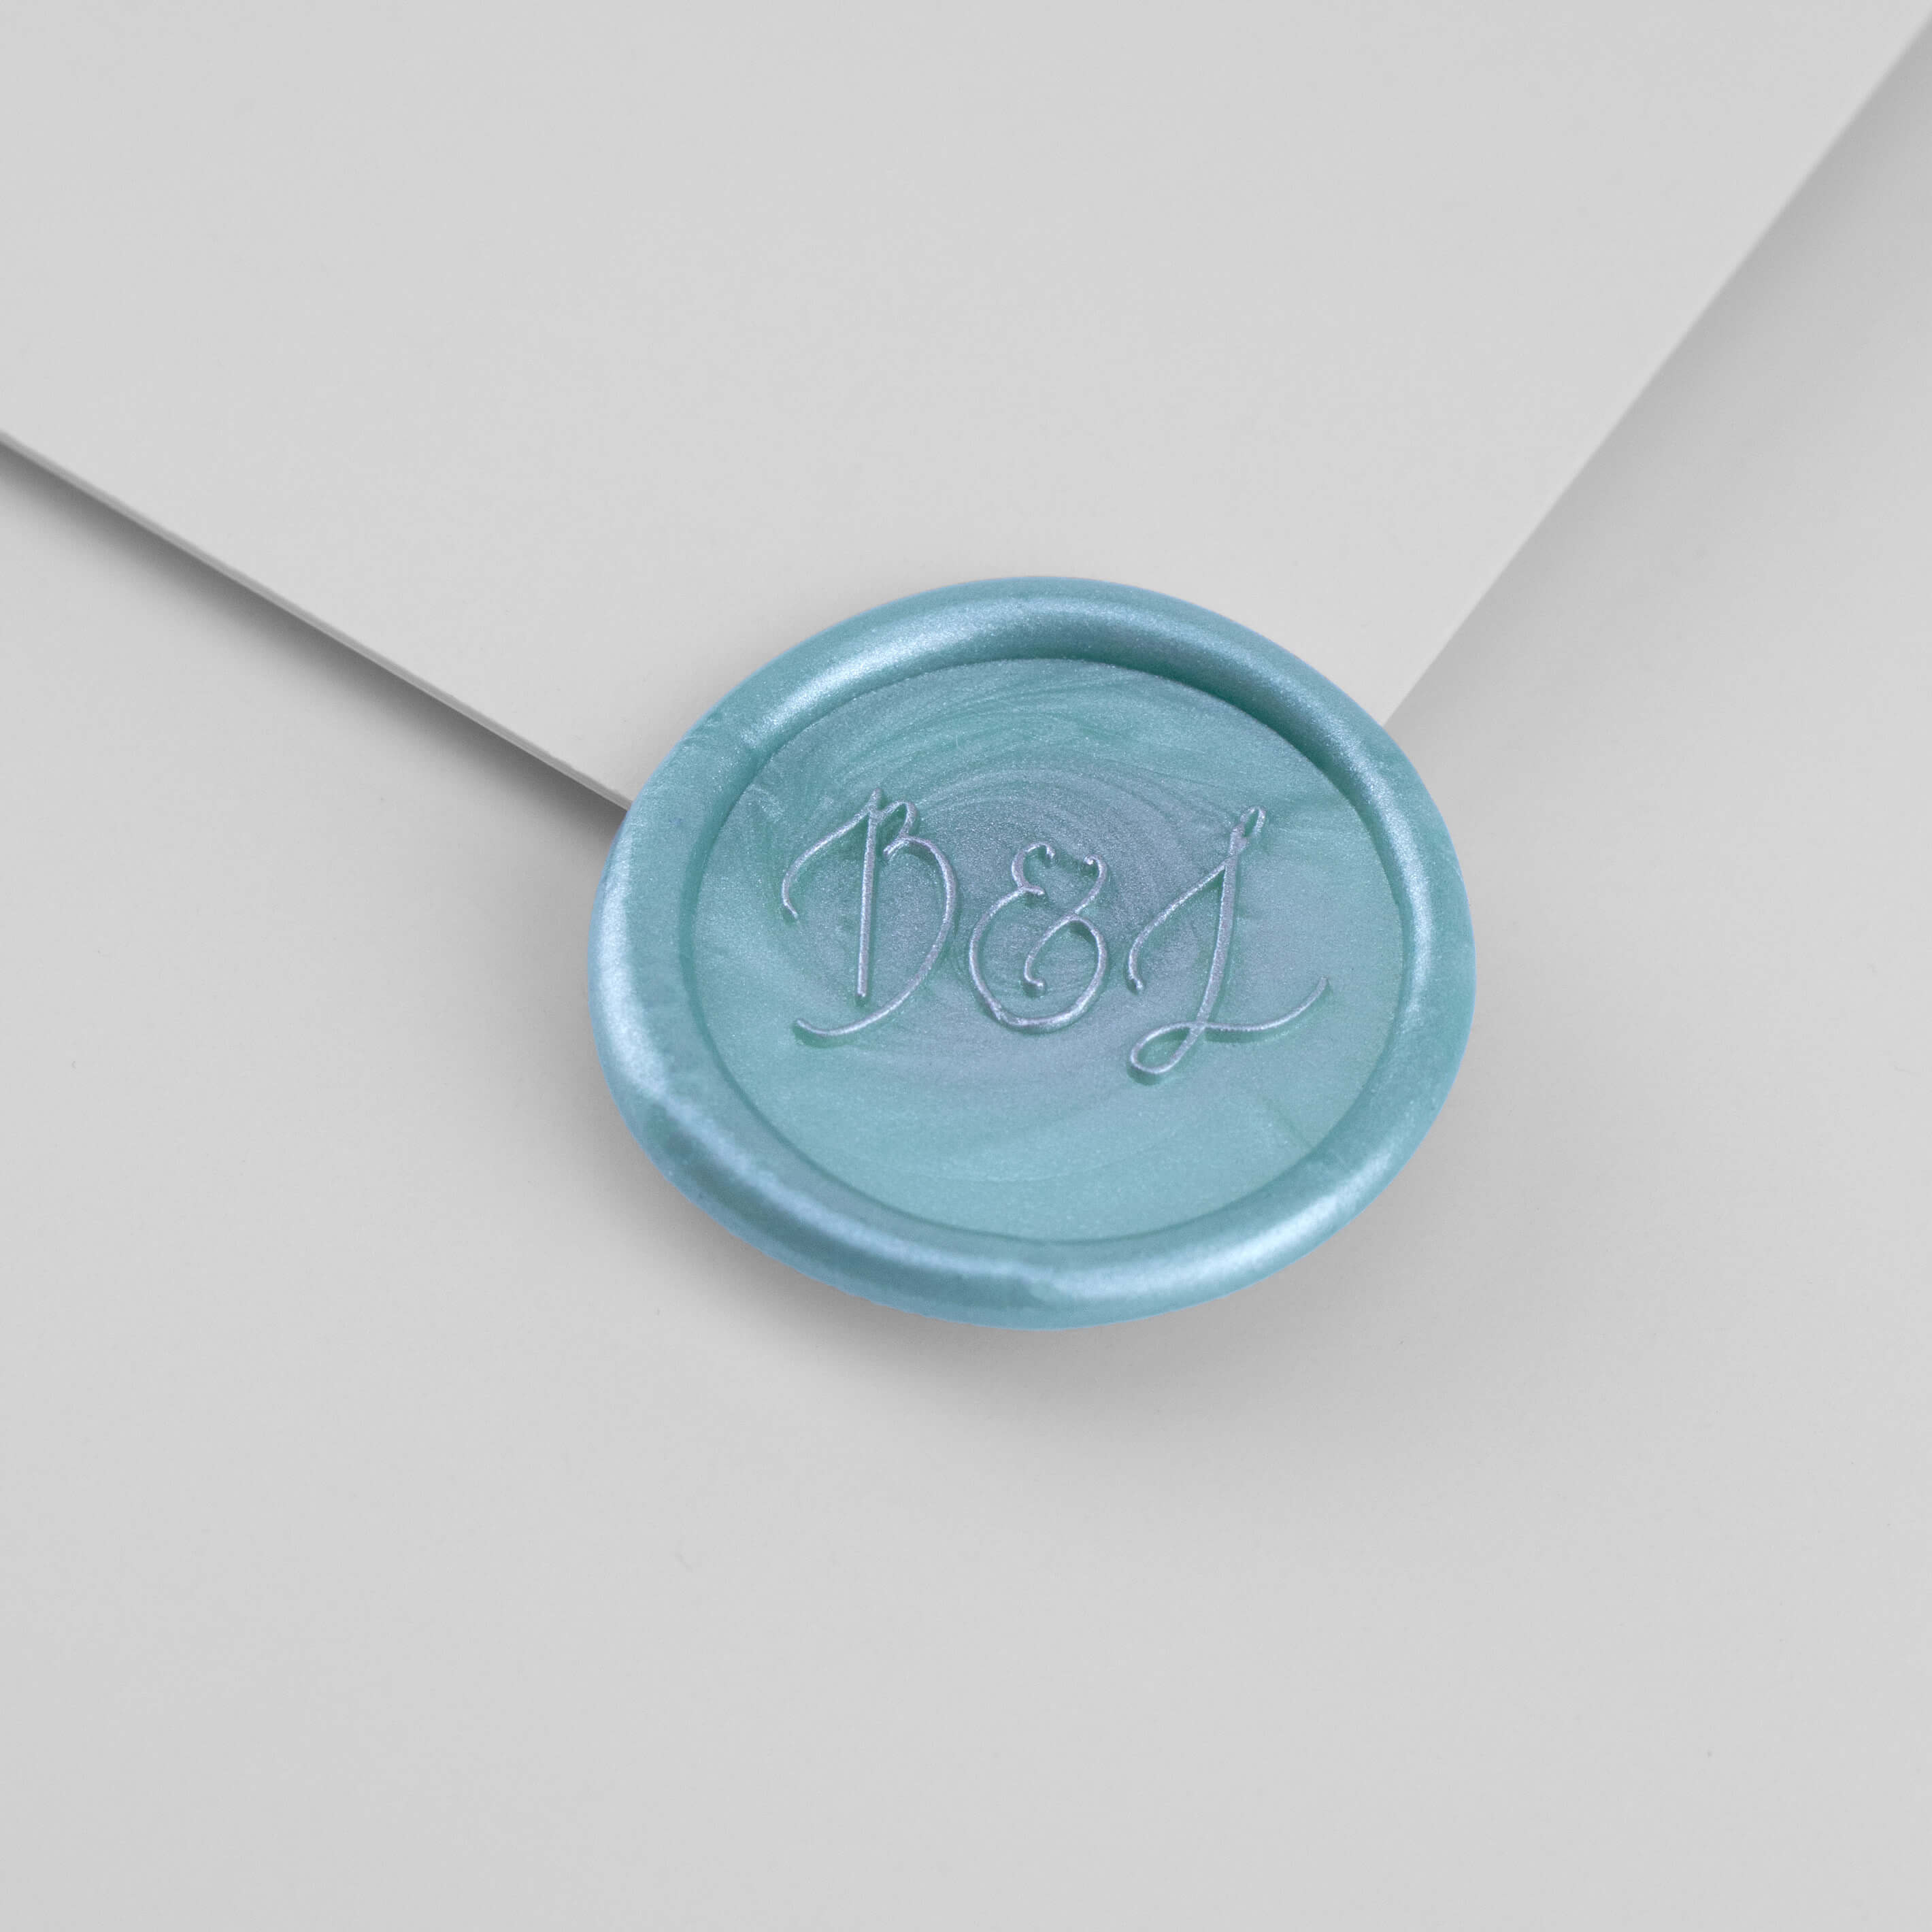 Kustom Haus - Wax Seal Stamp - Hitched Script - Two Initials